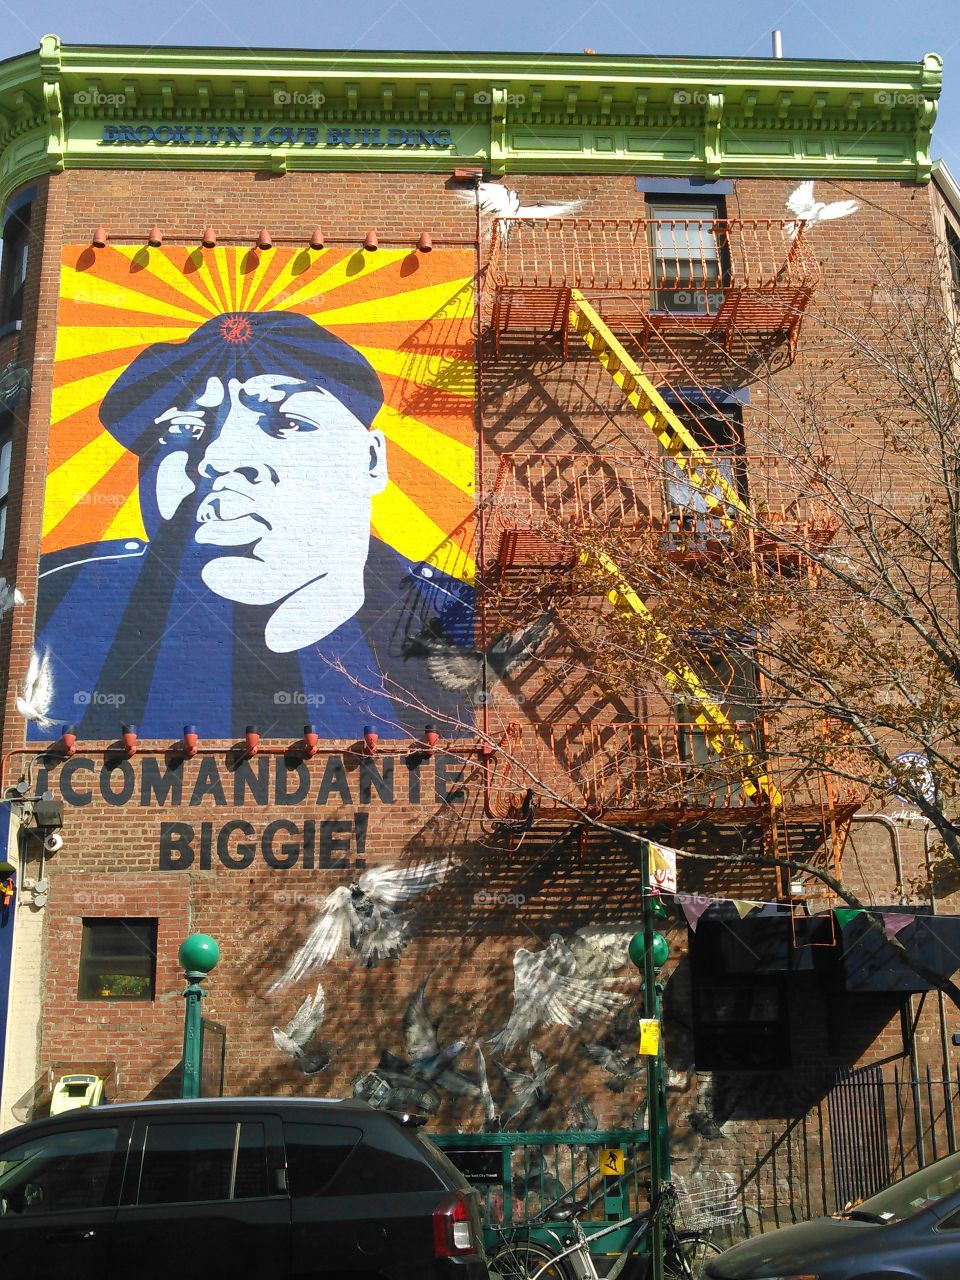 biggie commando photo. one time i was leaveing my work in retail and started walking down the block and seen this cool wall painting